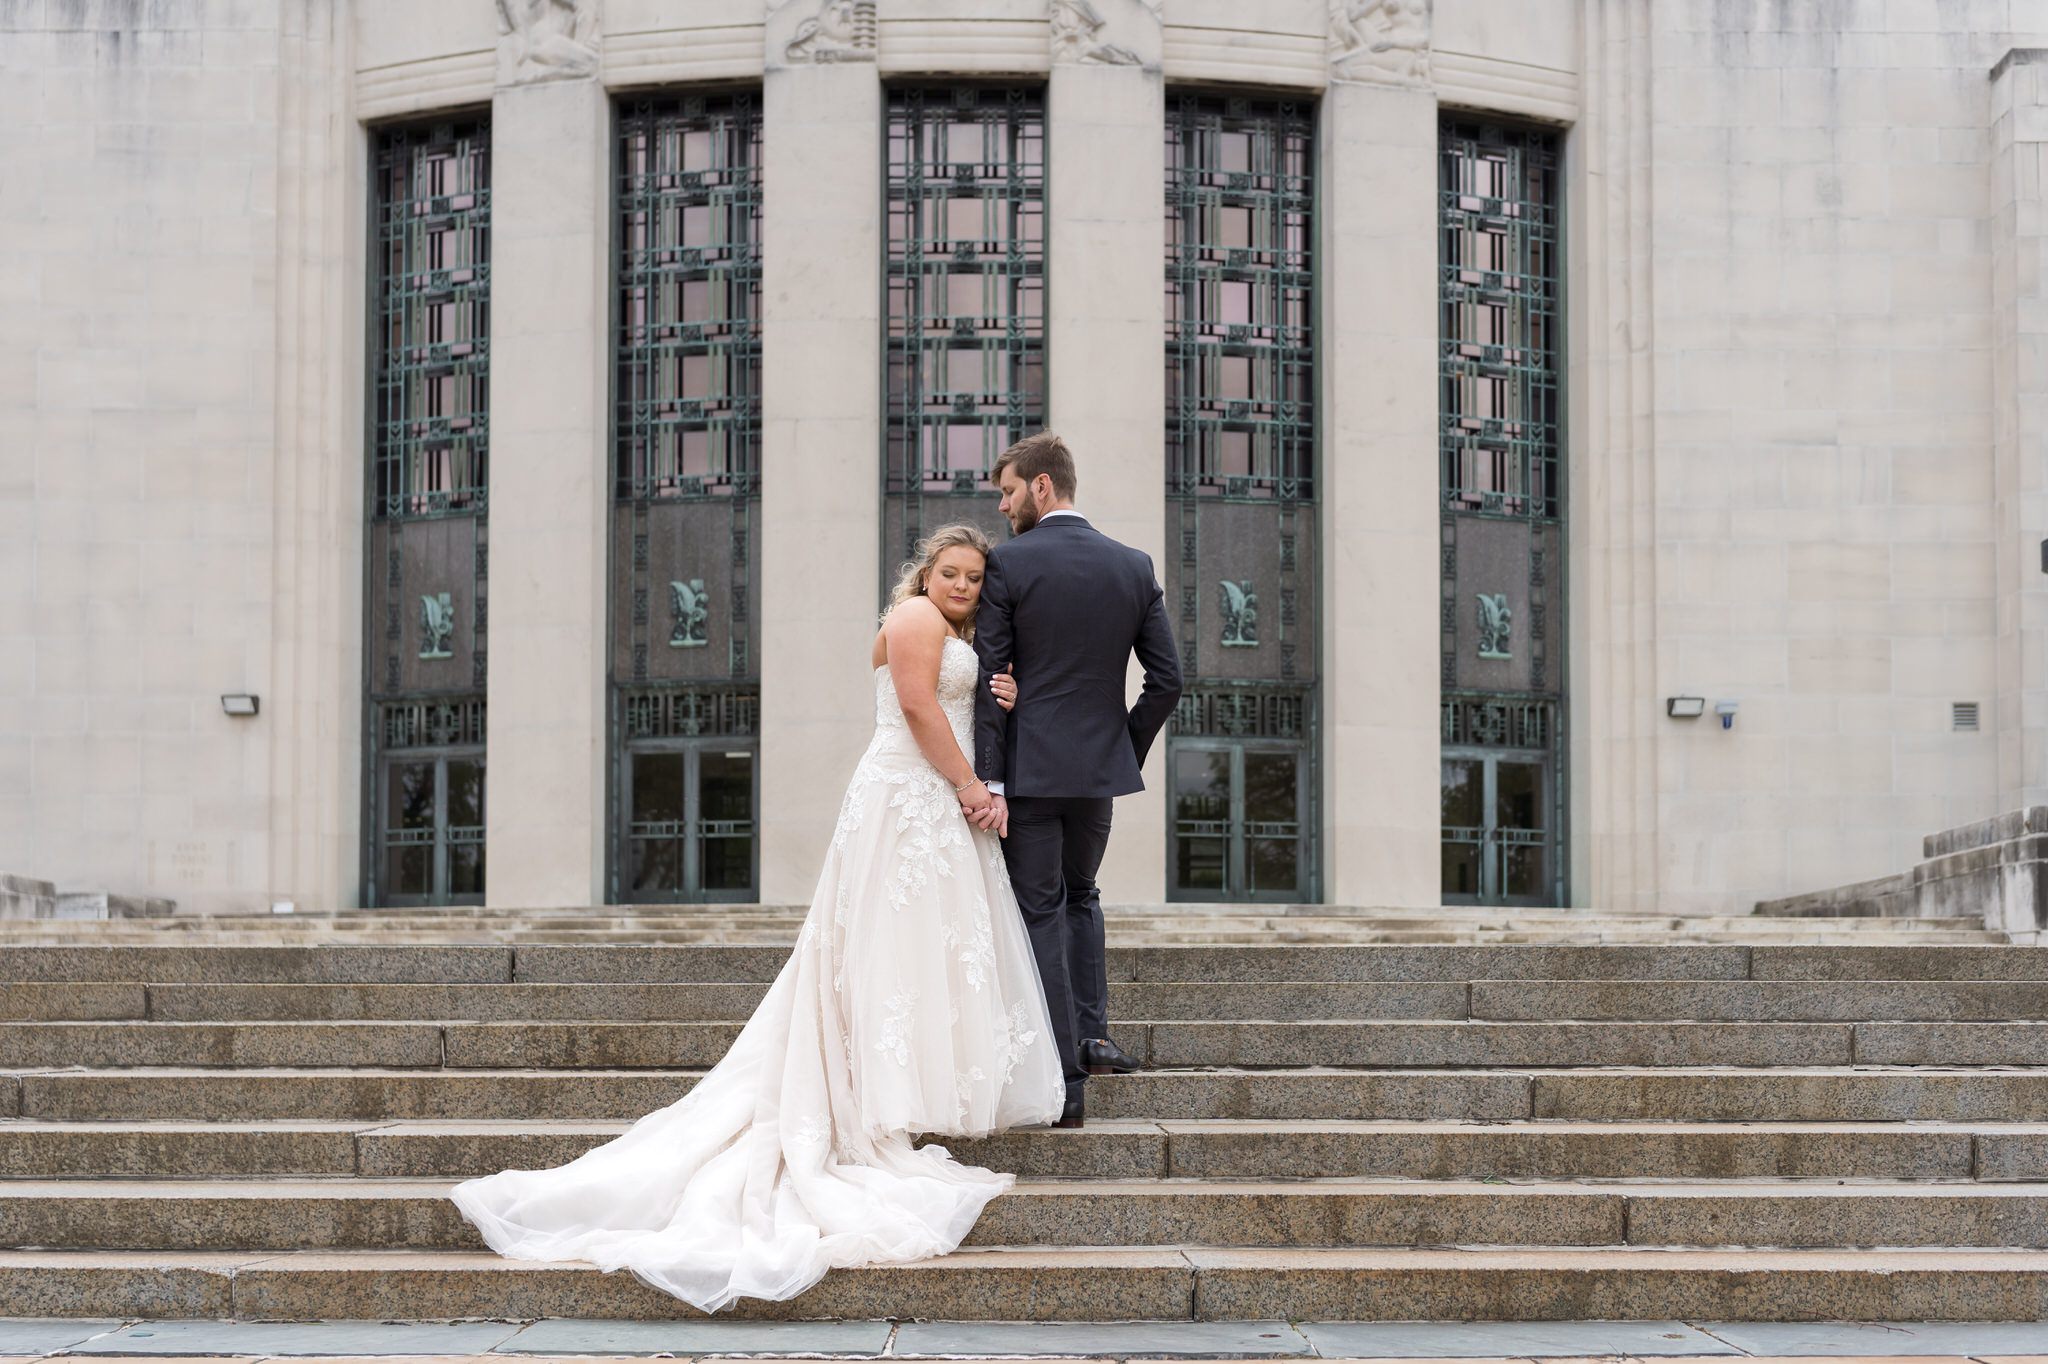 A bride and groom pose on the steps of the Horace H. Rackham Educational Memorial on their wedding day.  